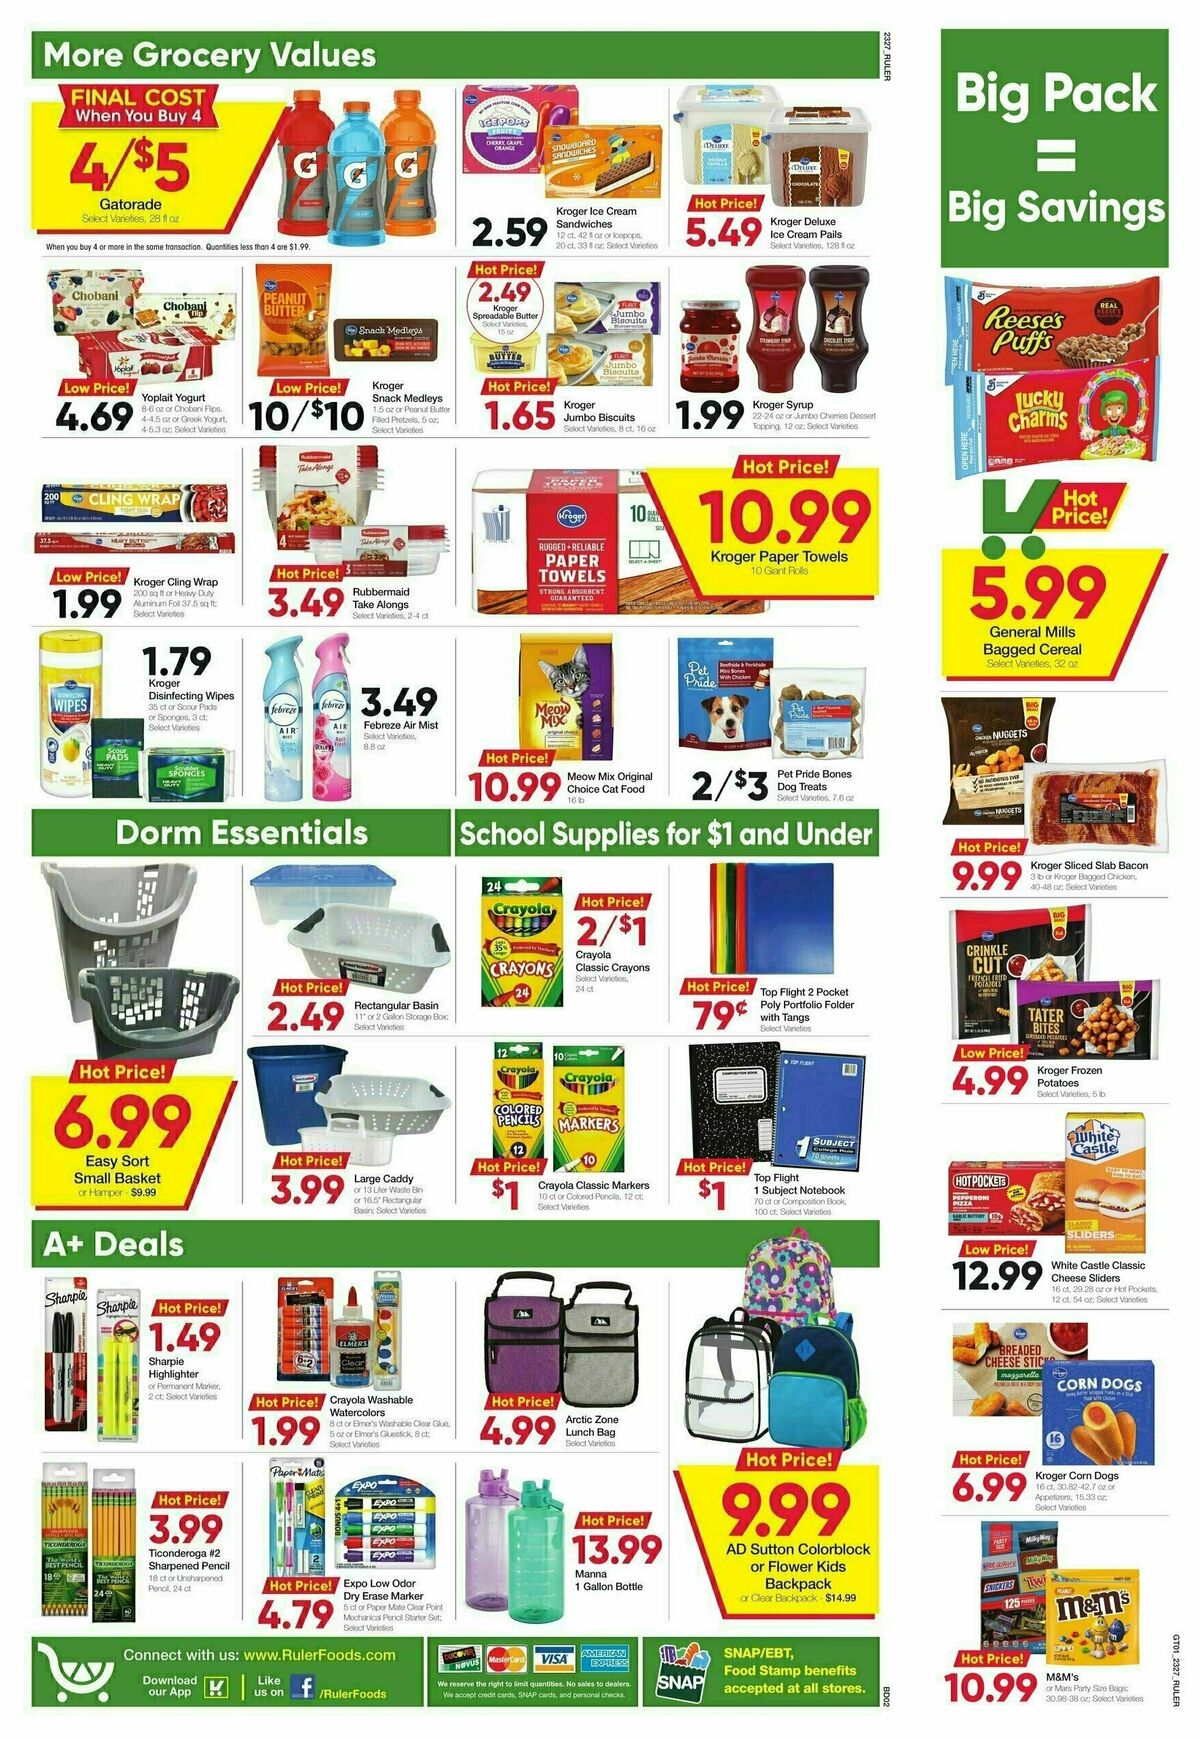 Ruler Foods Weekly Ad from August 2